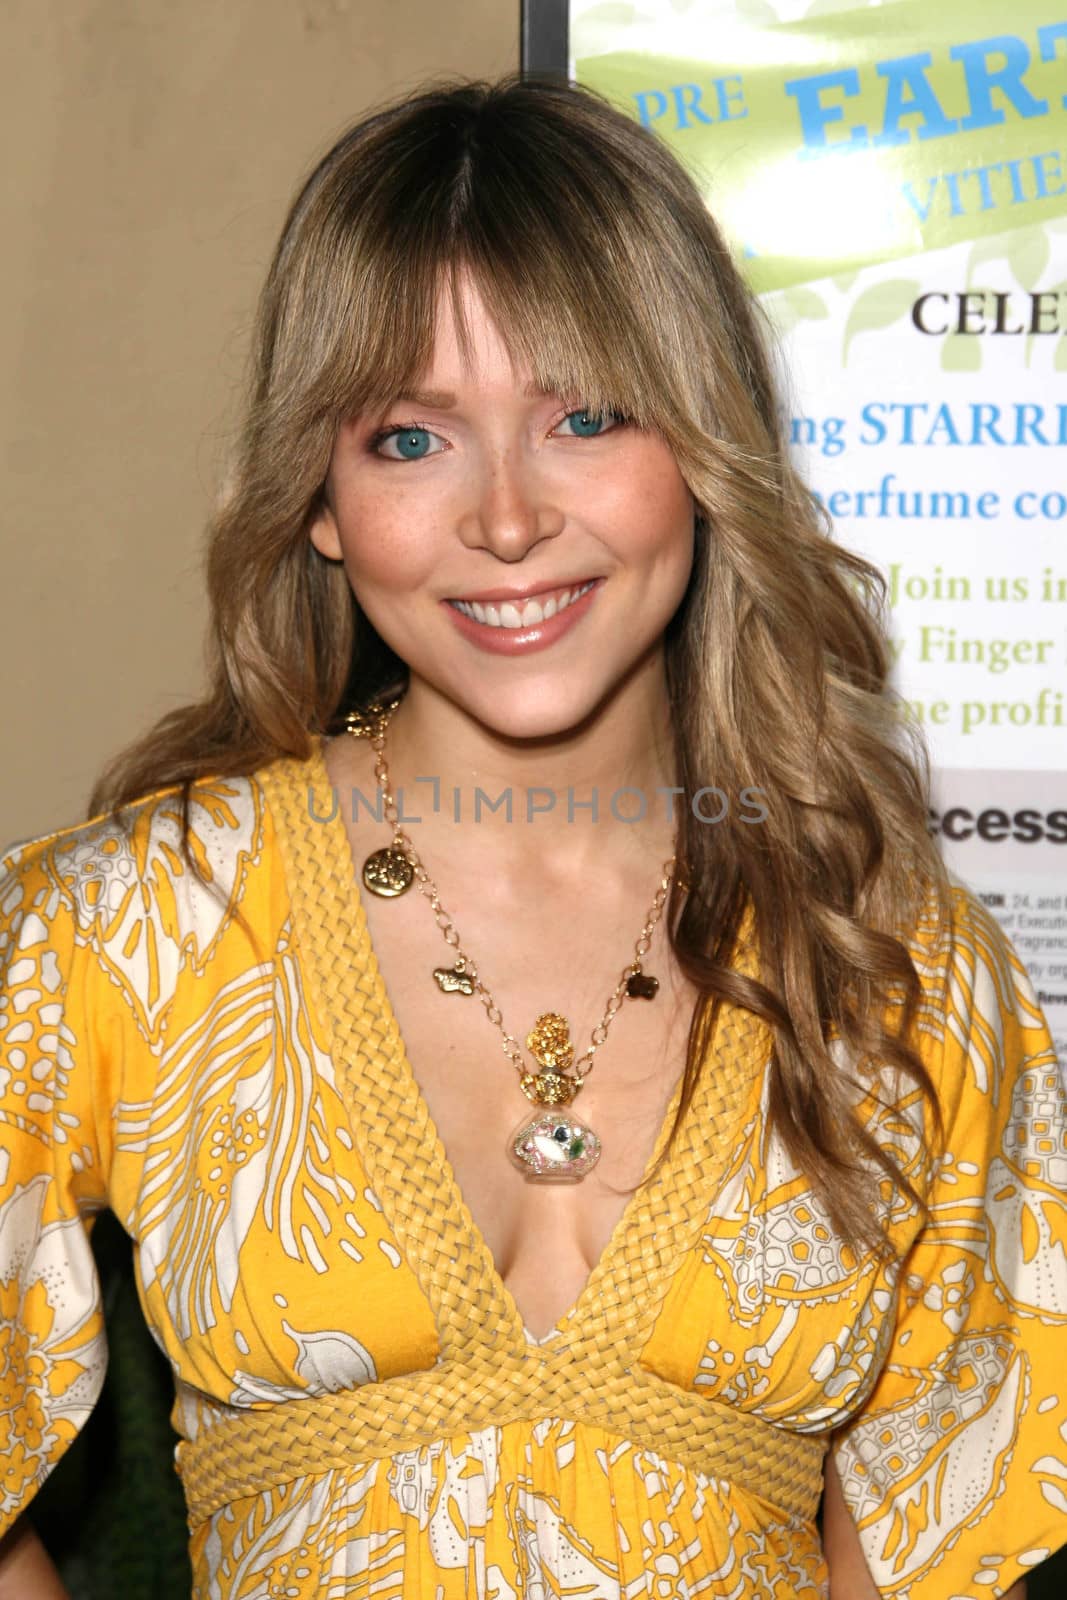 Ashley Peldon at the Launch party for "Starring...!" Fragrances and "Charmed" Jewelry, benefitting Tree People. Whole Foods Lifestyle Store, Los Angeles, CA. 04-21-08